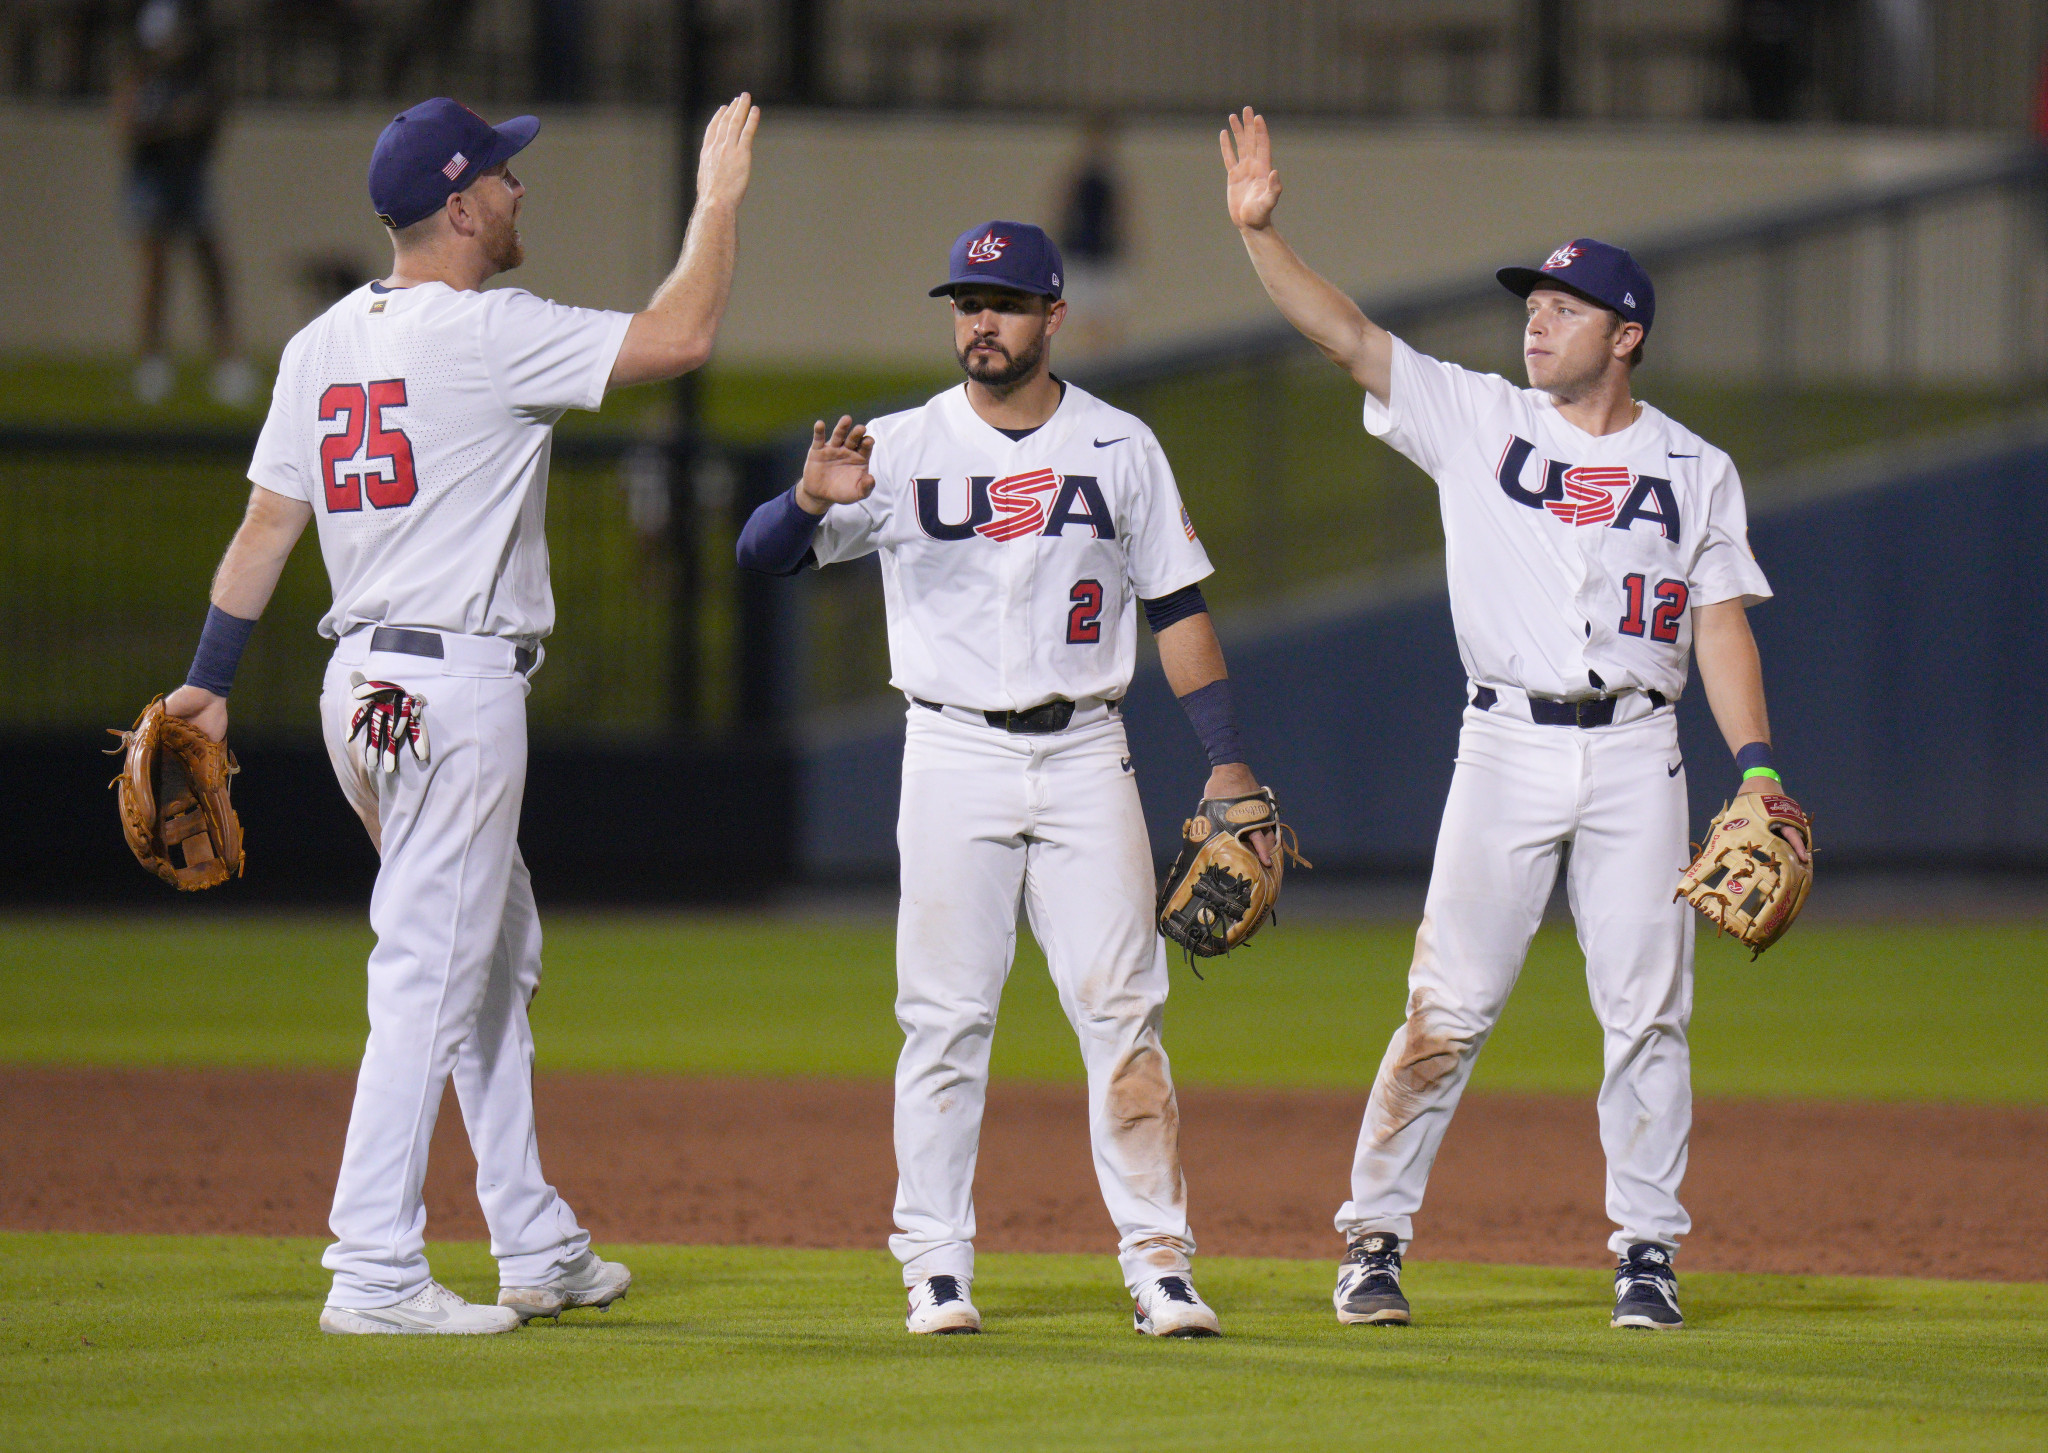 US defeat Canada to move within a win of Olympic baseball berth